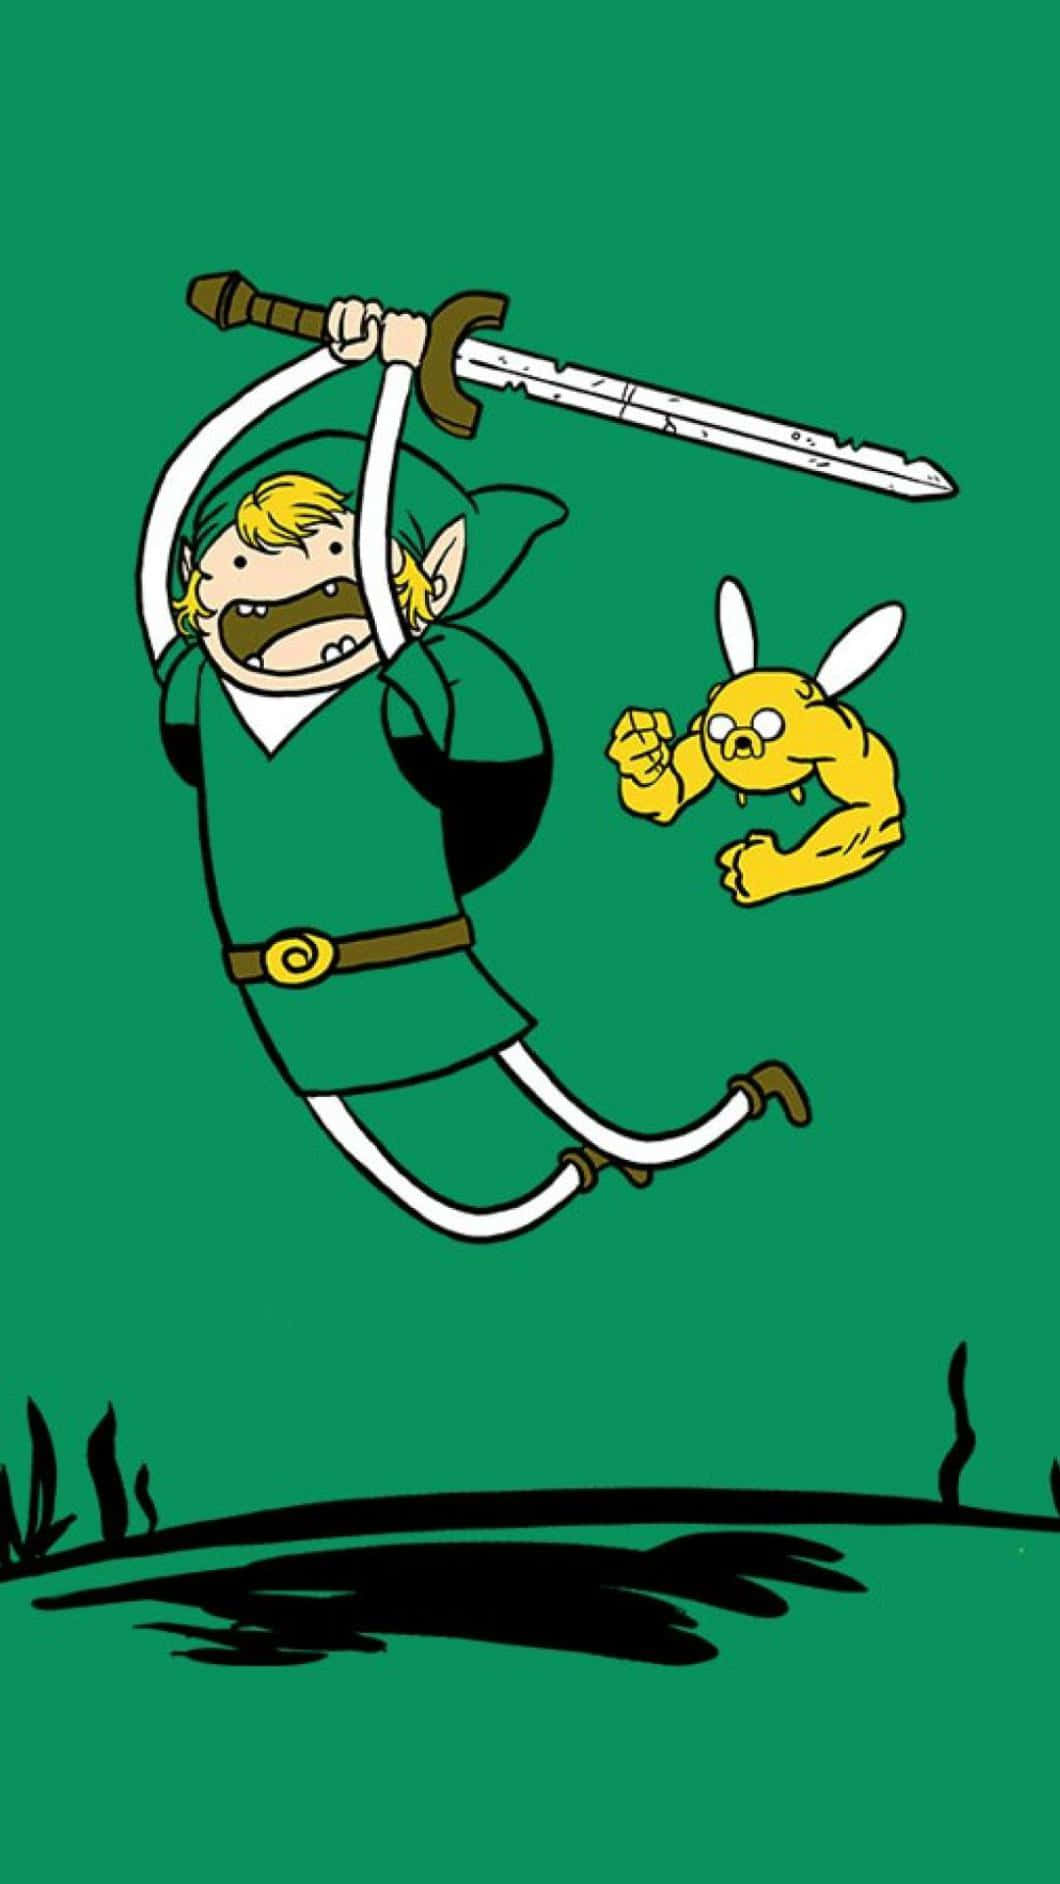 Enjoy the Adventure of a Lifetime with the Adventure Time iPhone Wallpaper